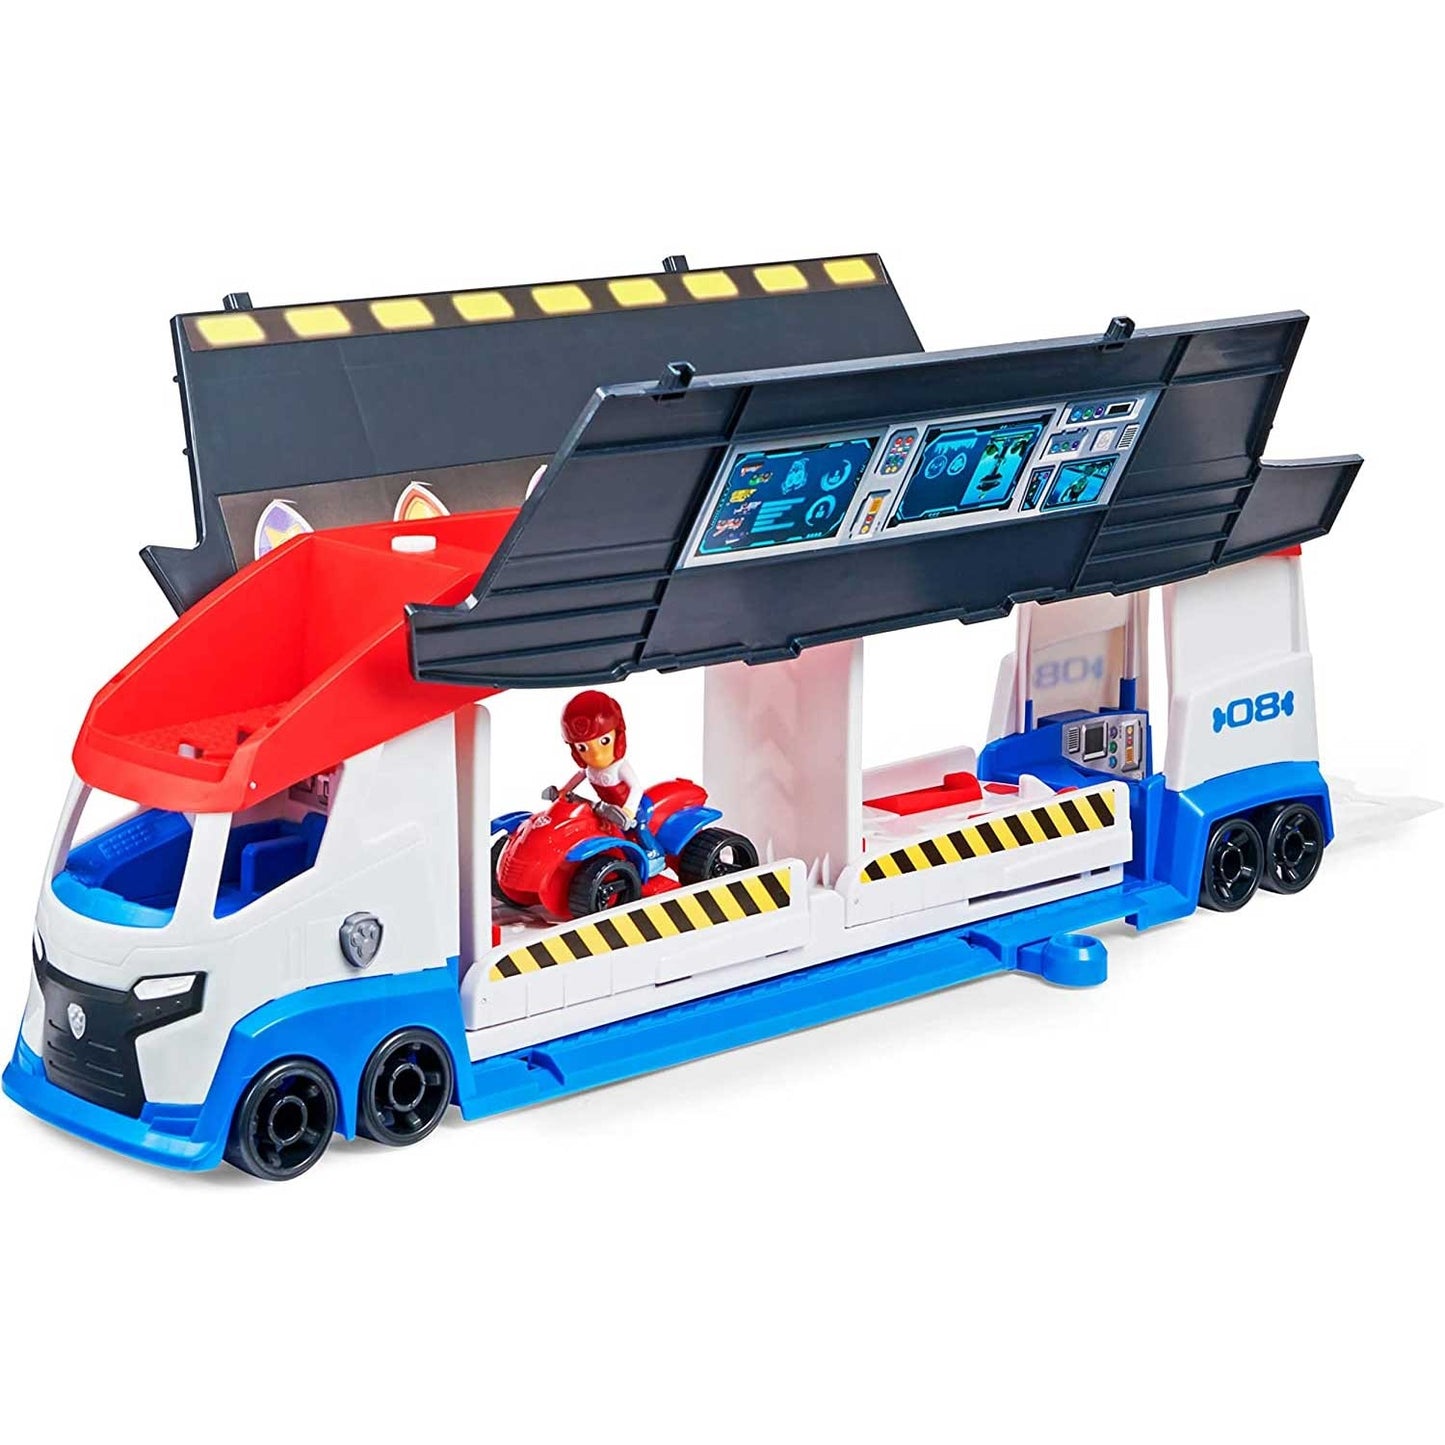 Spin Master - Paw Patrol Paw Patroller Deluxe